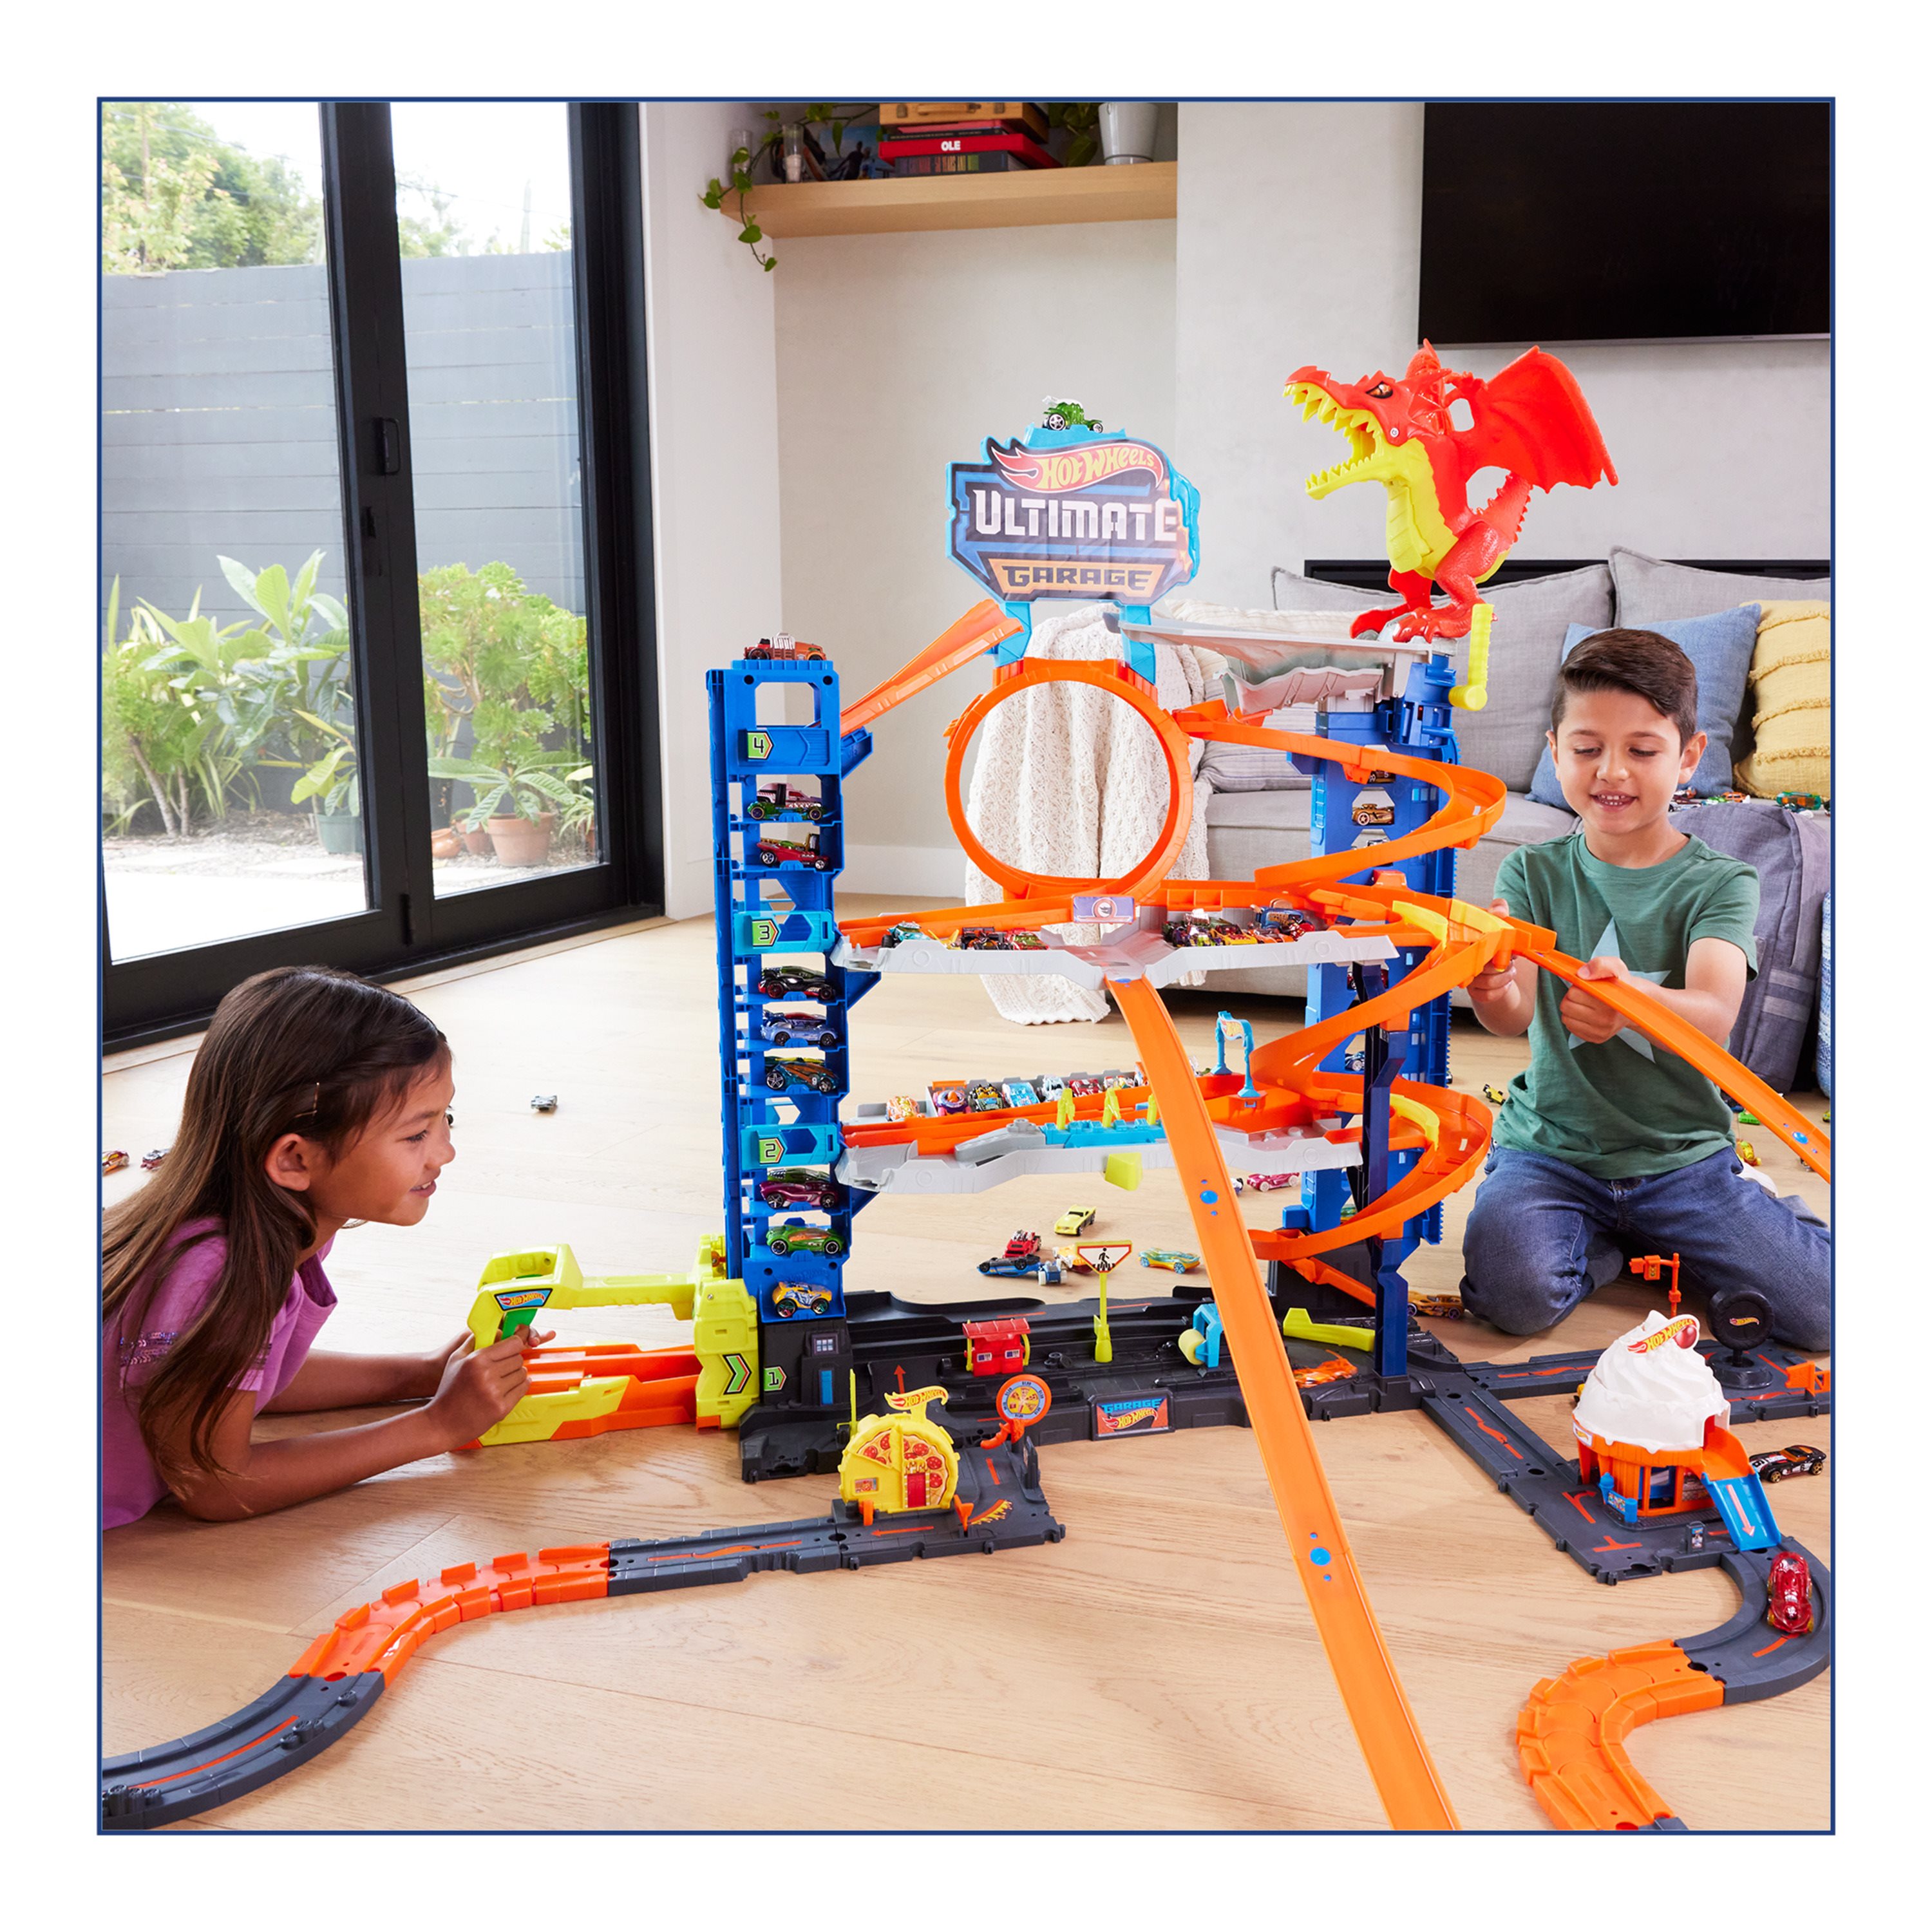 Buy Hot Wheels City Ultimate Garage Playset, Toy cars and trucks